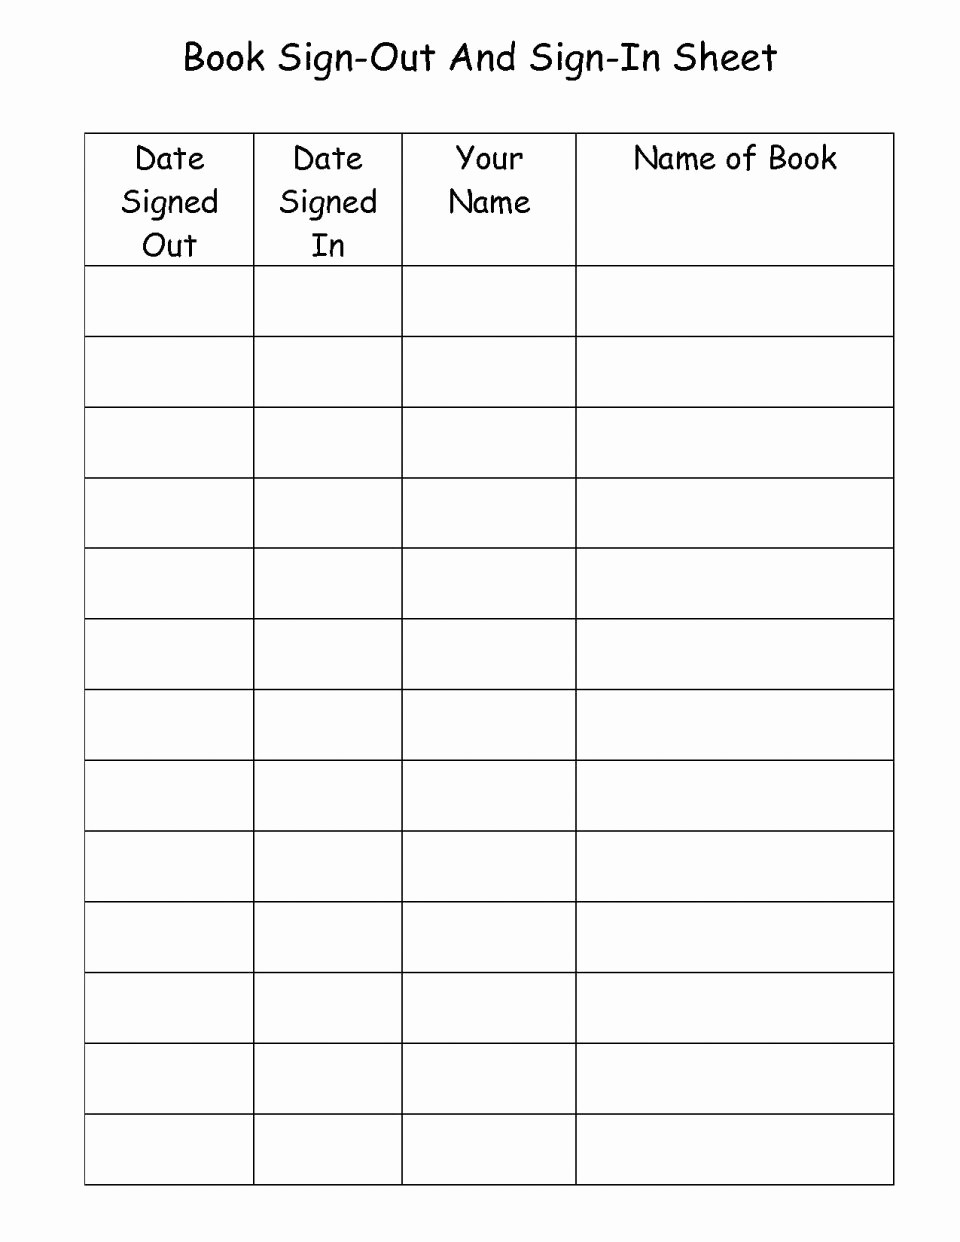 Inventory Sign Out Sheet Excel Elegant Sheet Inventory Sign Out Template Free Download In Sample